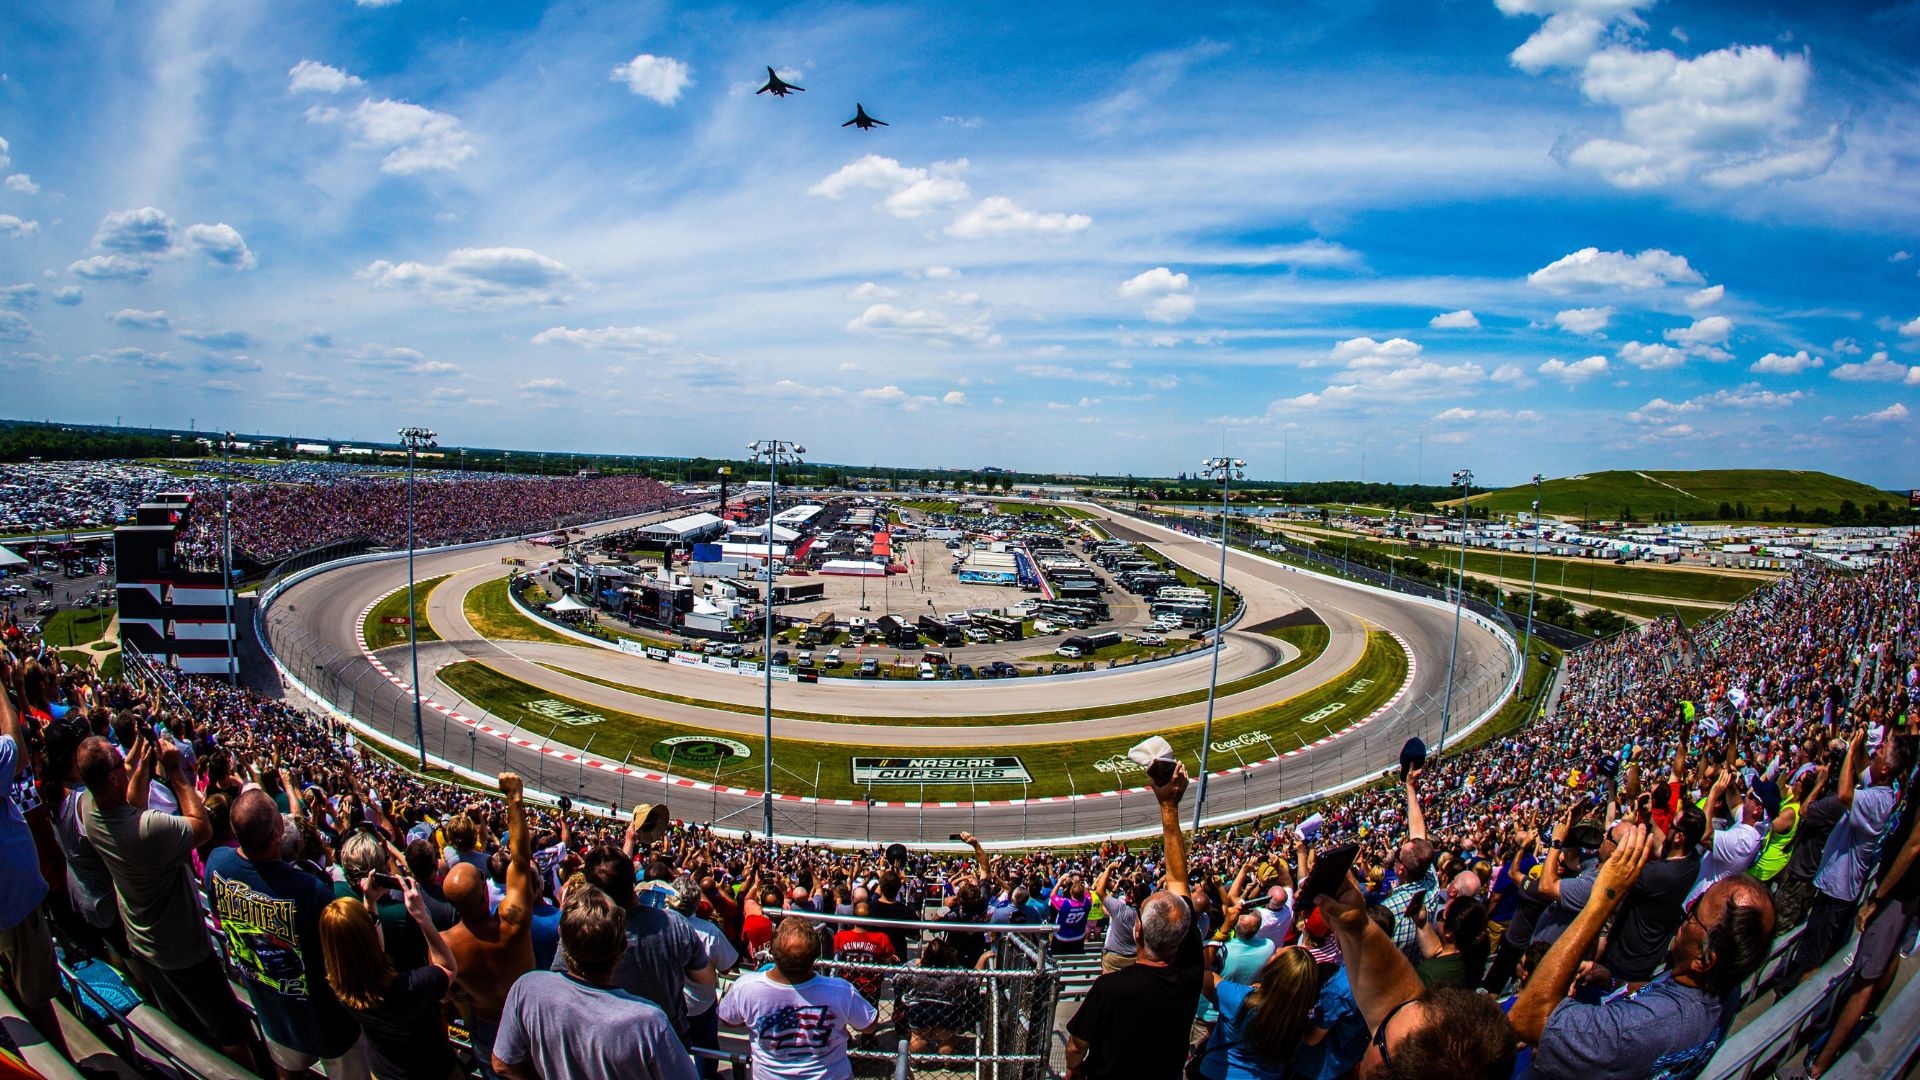 World Wide Technology Raceway hosts major events that appeal to a wide range of racing interests.